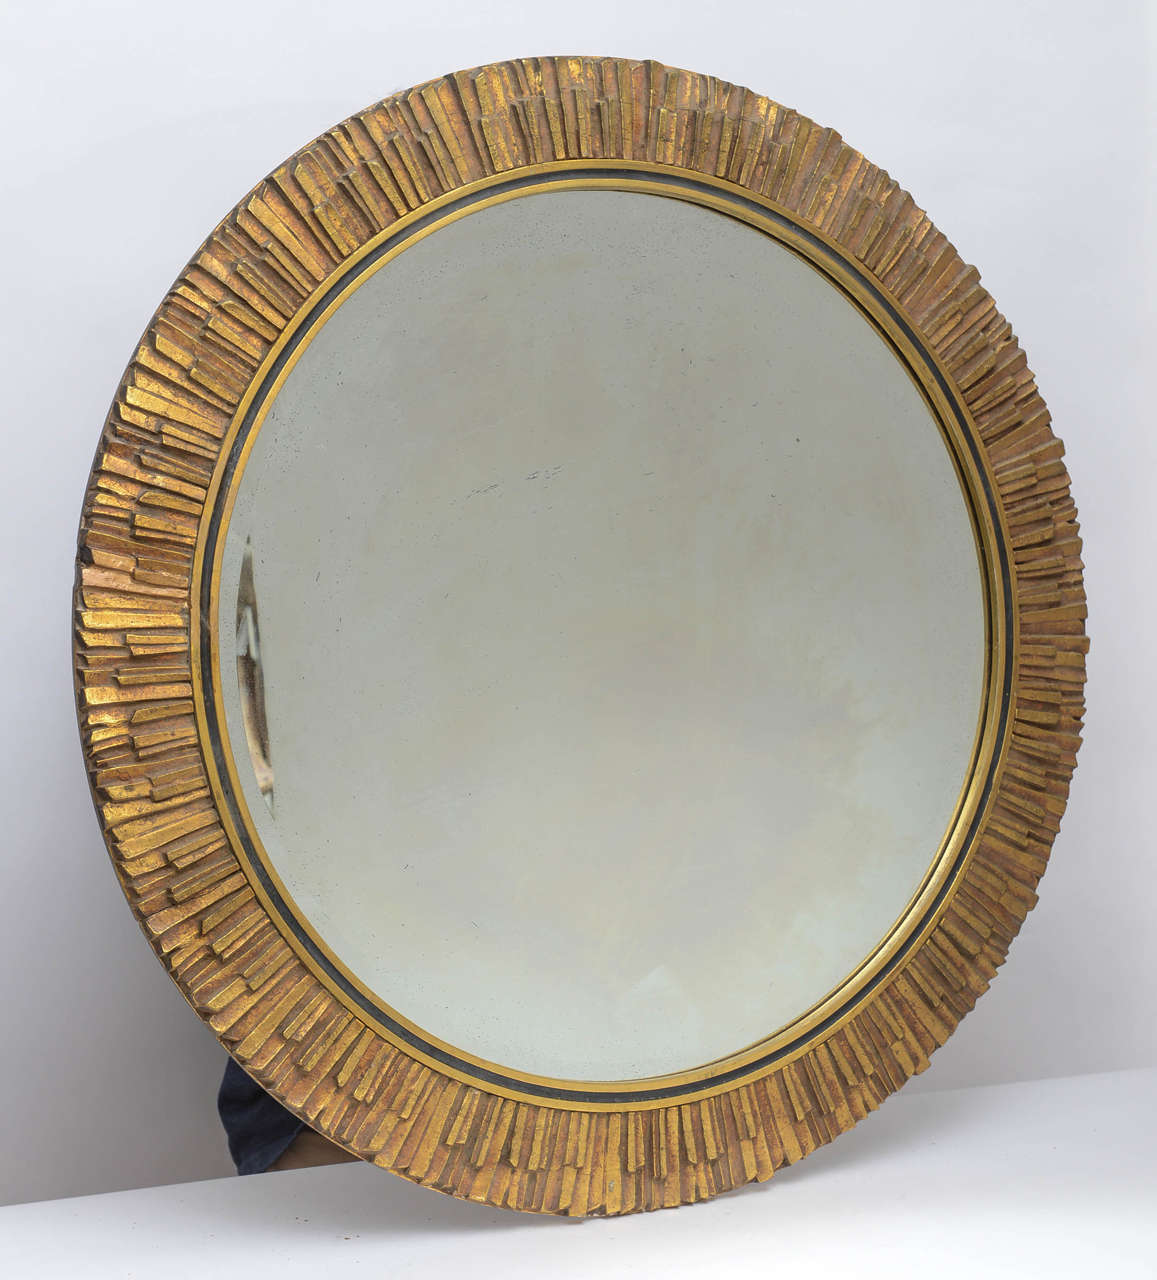 Italian Sunburst mirror made of inlaid hand-cut pieces of gilded wood.
Mirror itself is beveled and contains foxing indicating its vintage age.